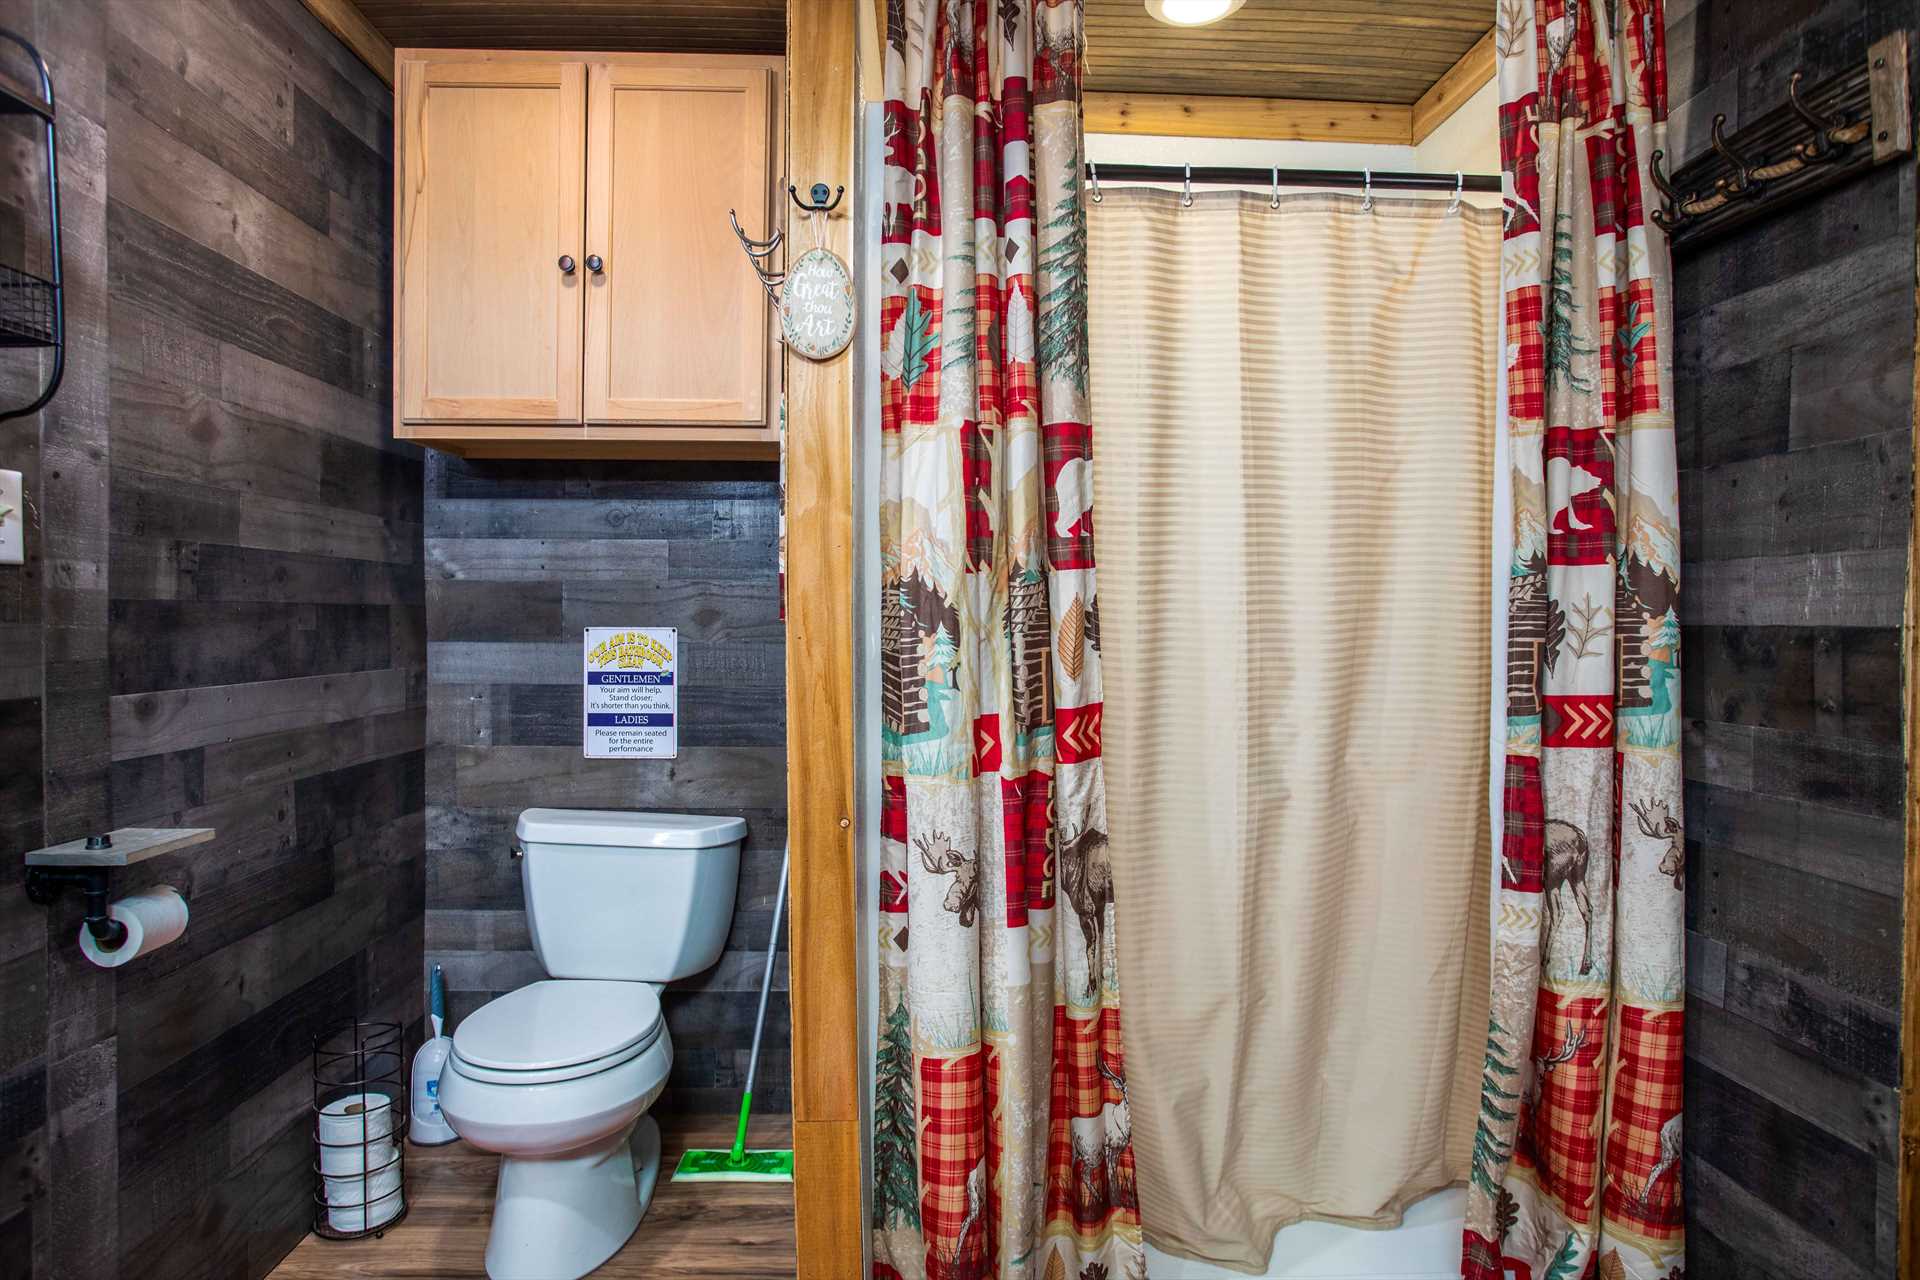                                                 There's a clean and roomy shower stall here, and all your bath linens are provided during your stay!